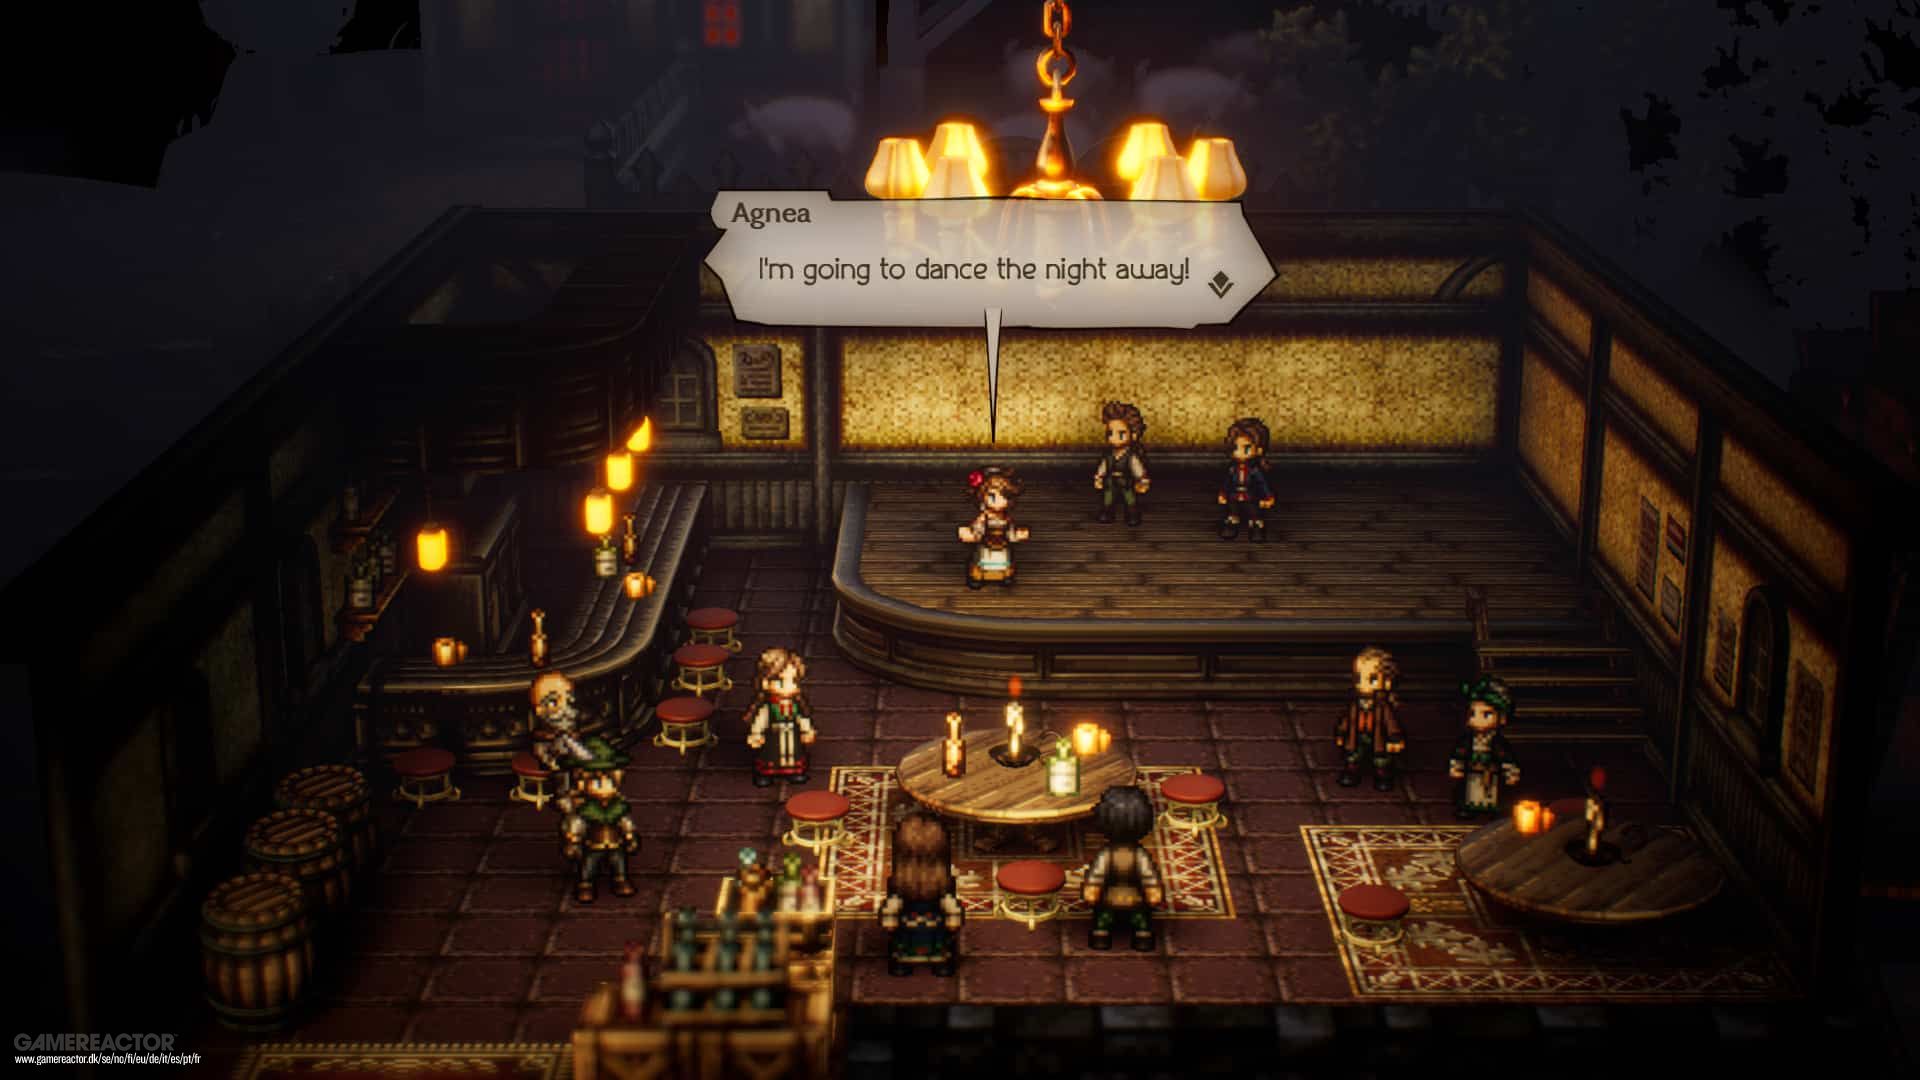 Octopath Traveler 2 review -- A worthy follow up to a genre defining game